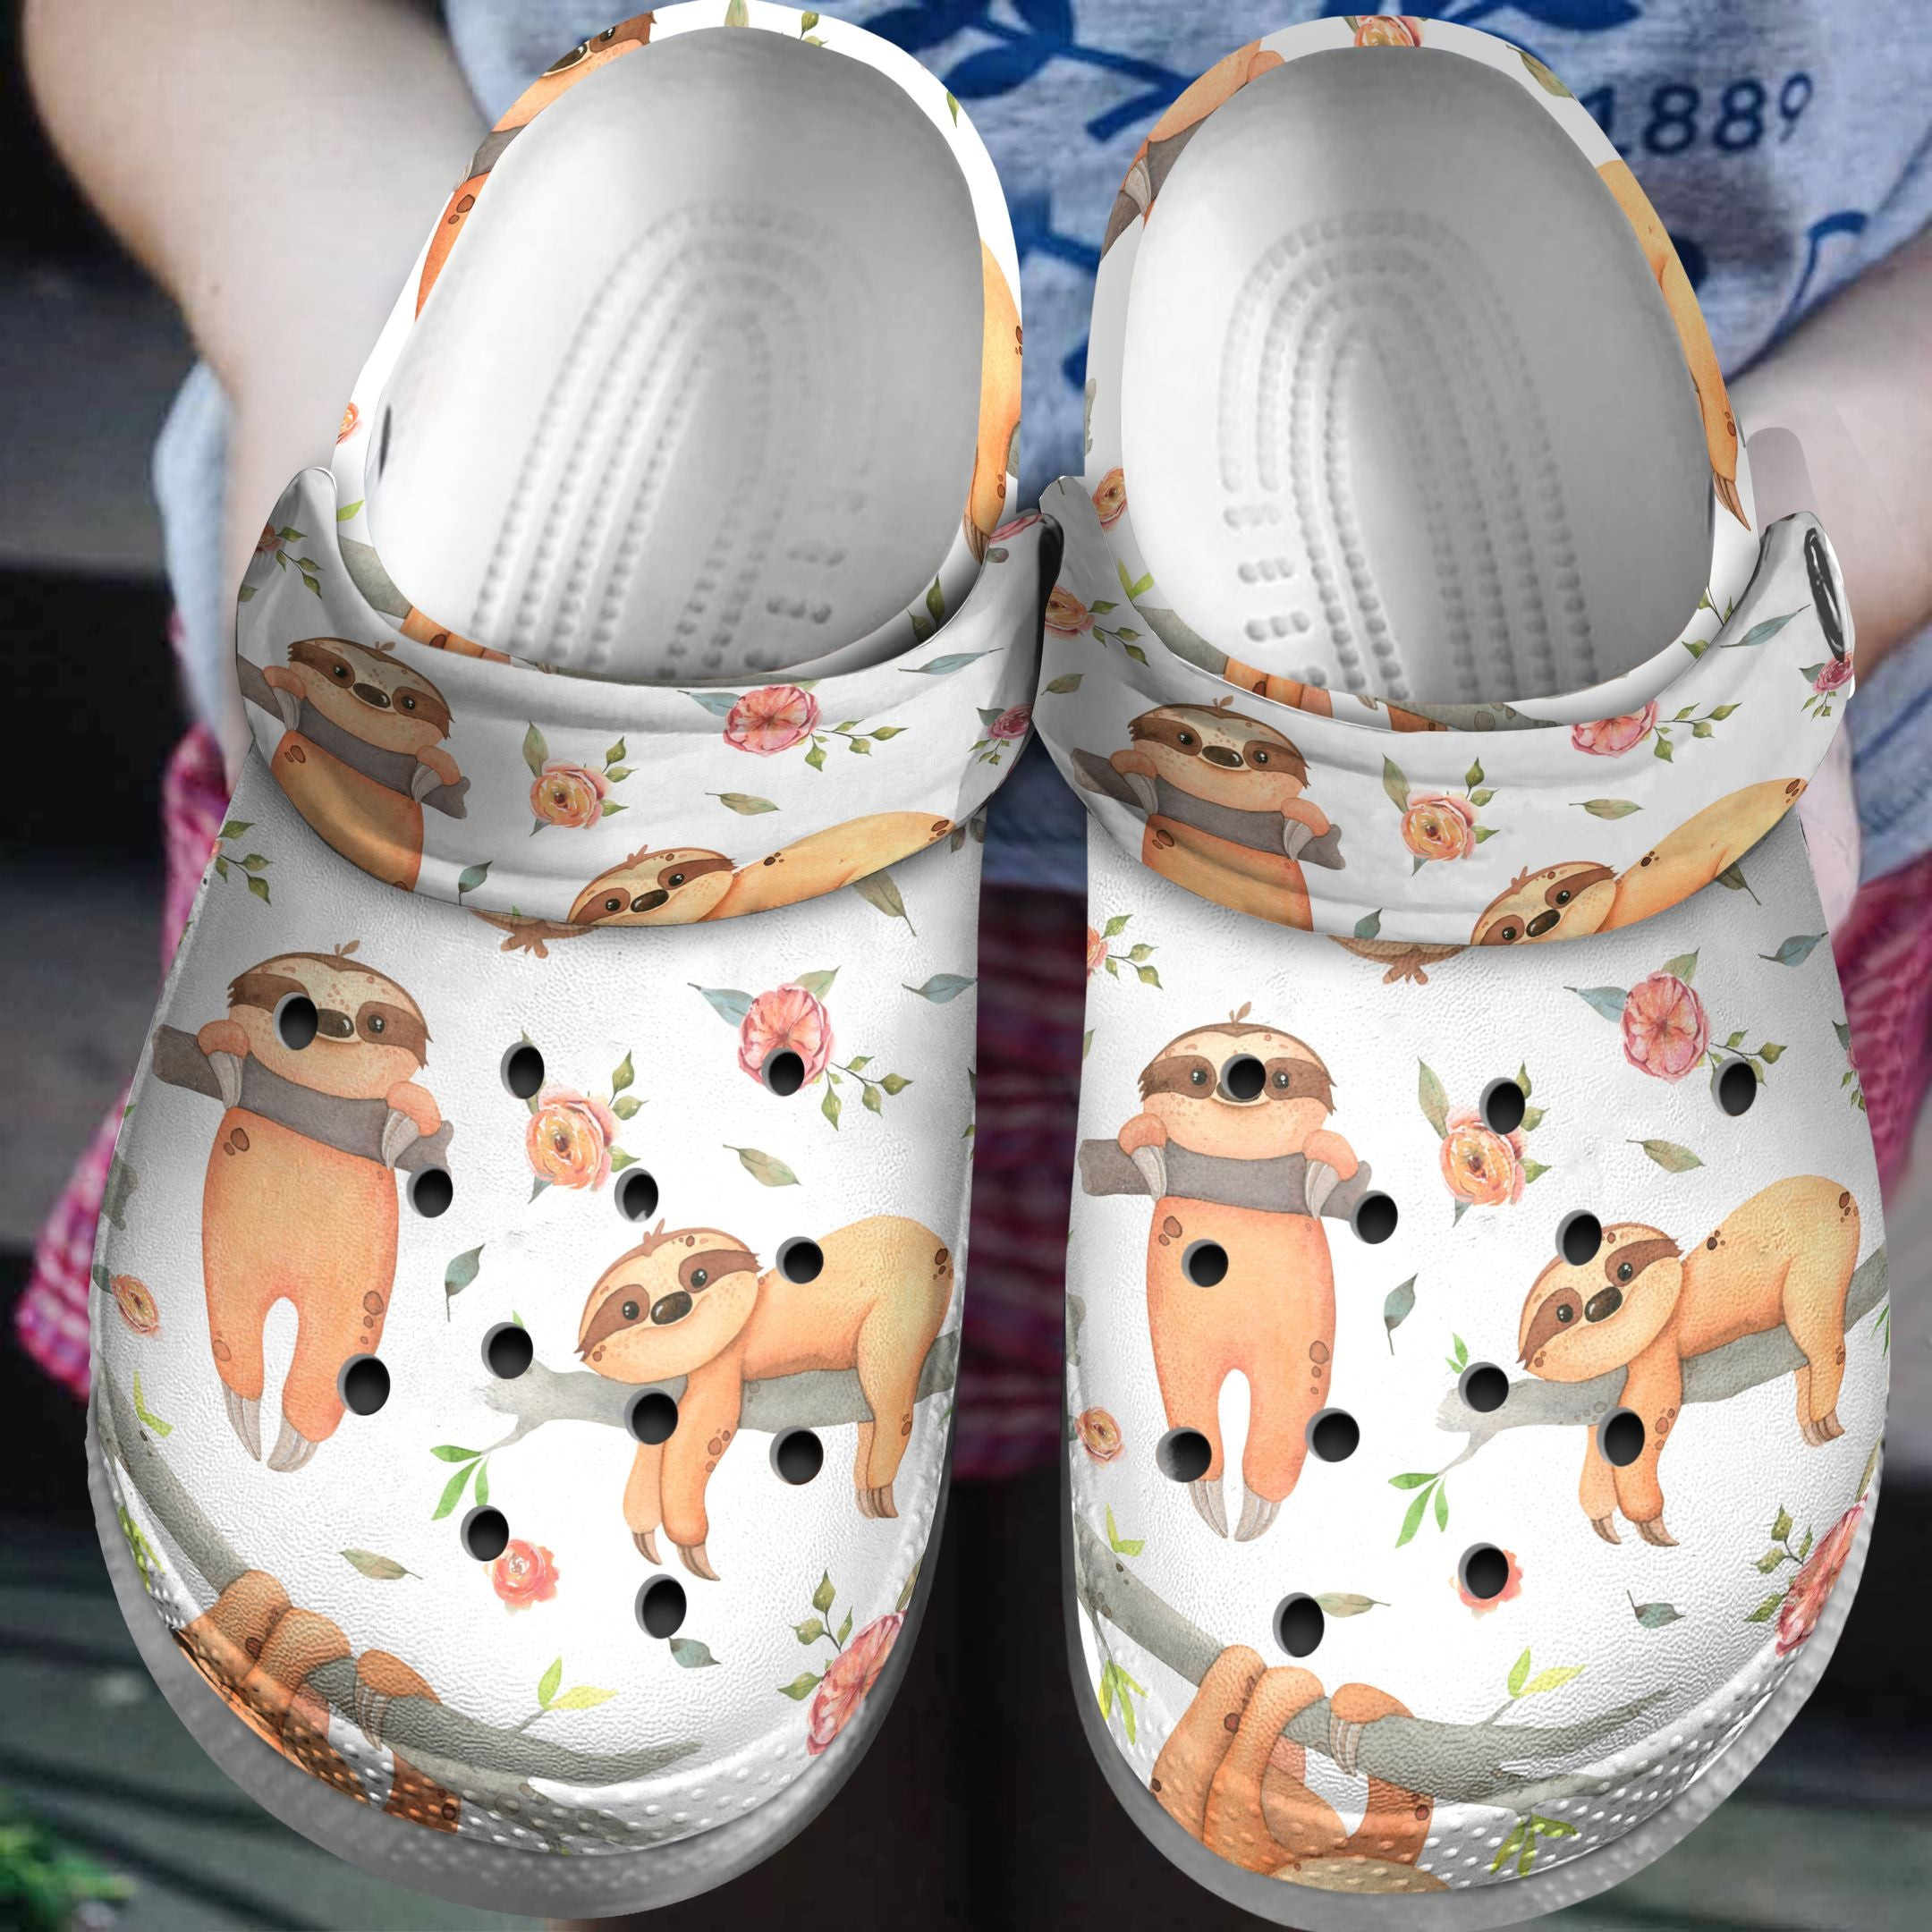 Cool Sloth With Flower Shoes – Funny Animal Crocs Clog Gift For Birthday